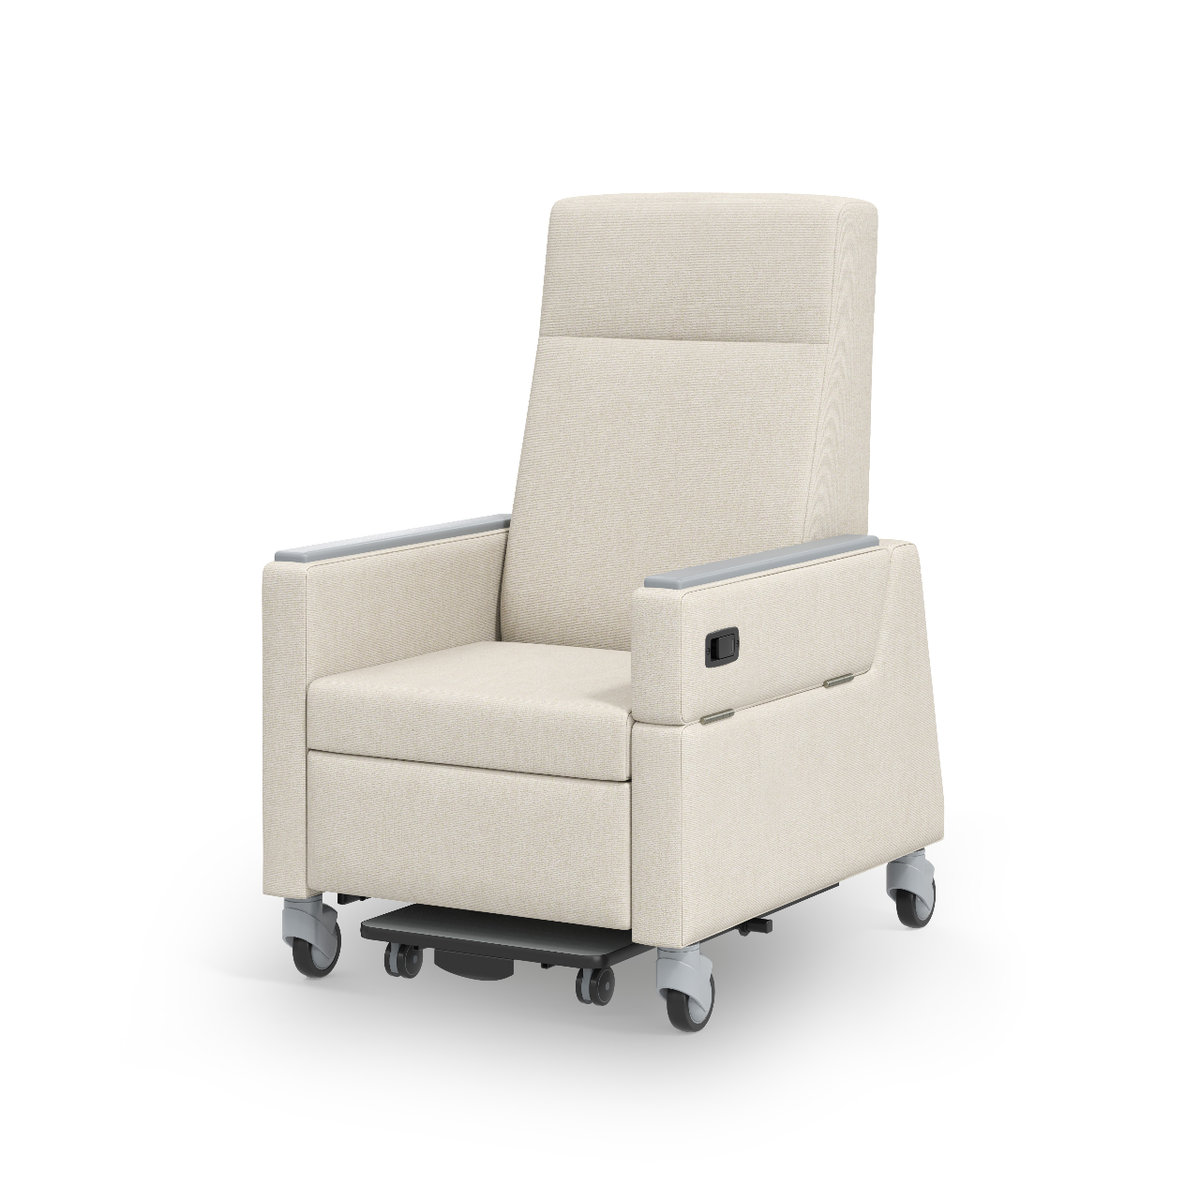 23 inch Recliner, patient transfer arm Photo